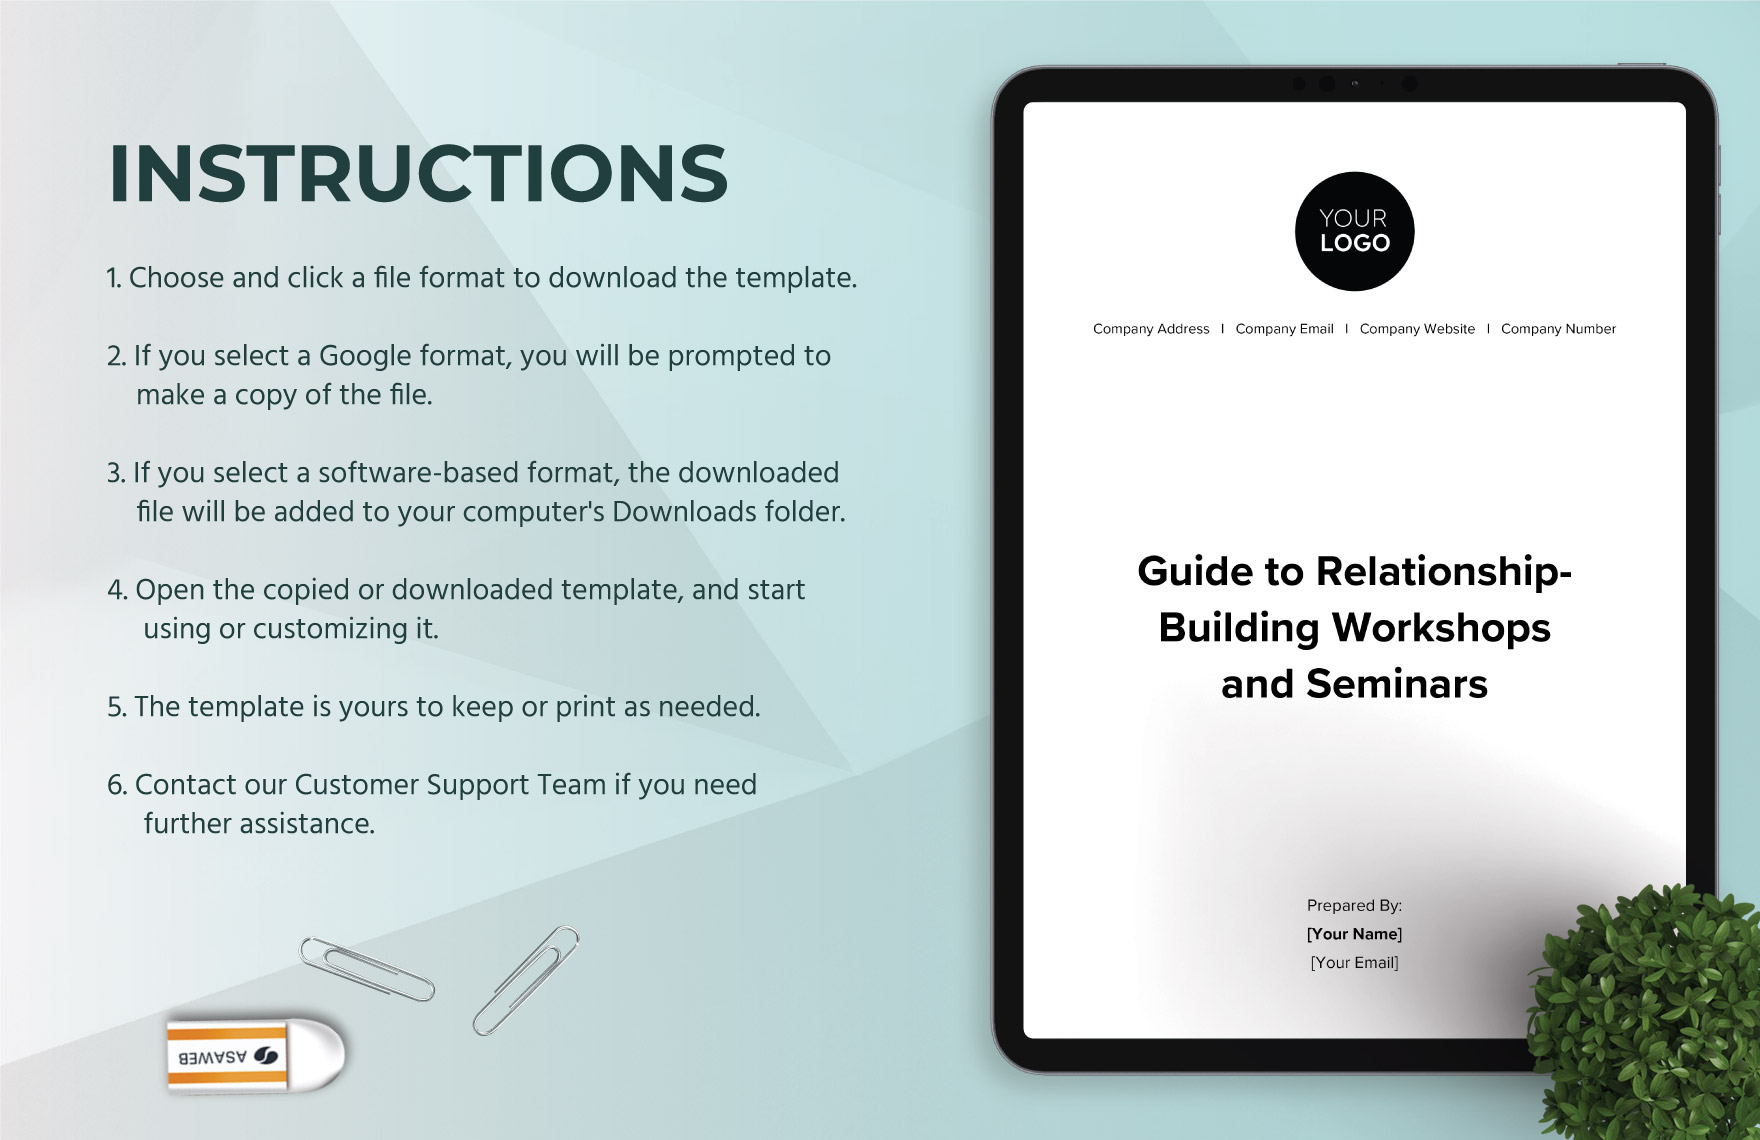 Guide to Relationship-building Workshops and Seminars HR Template